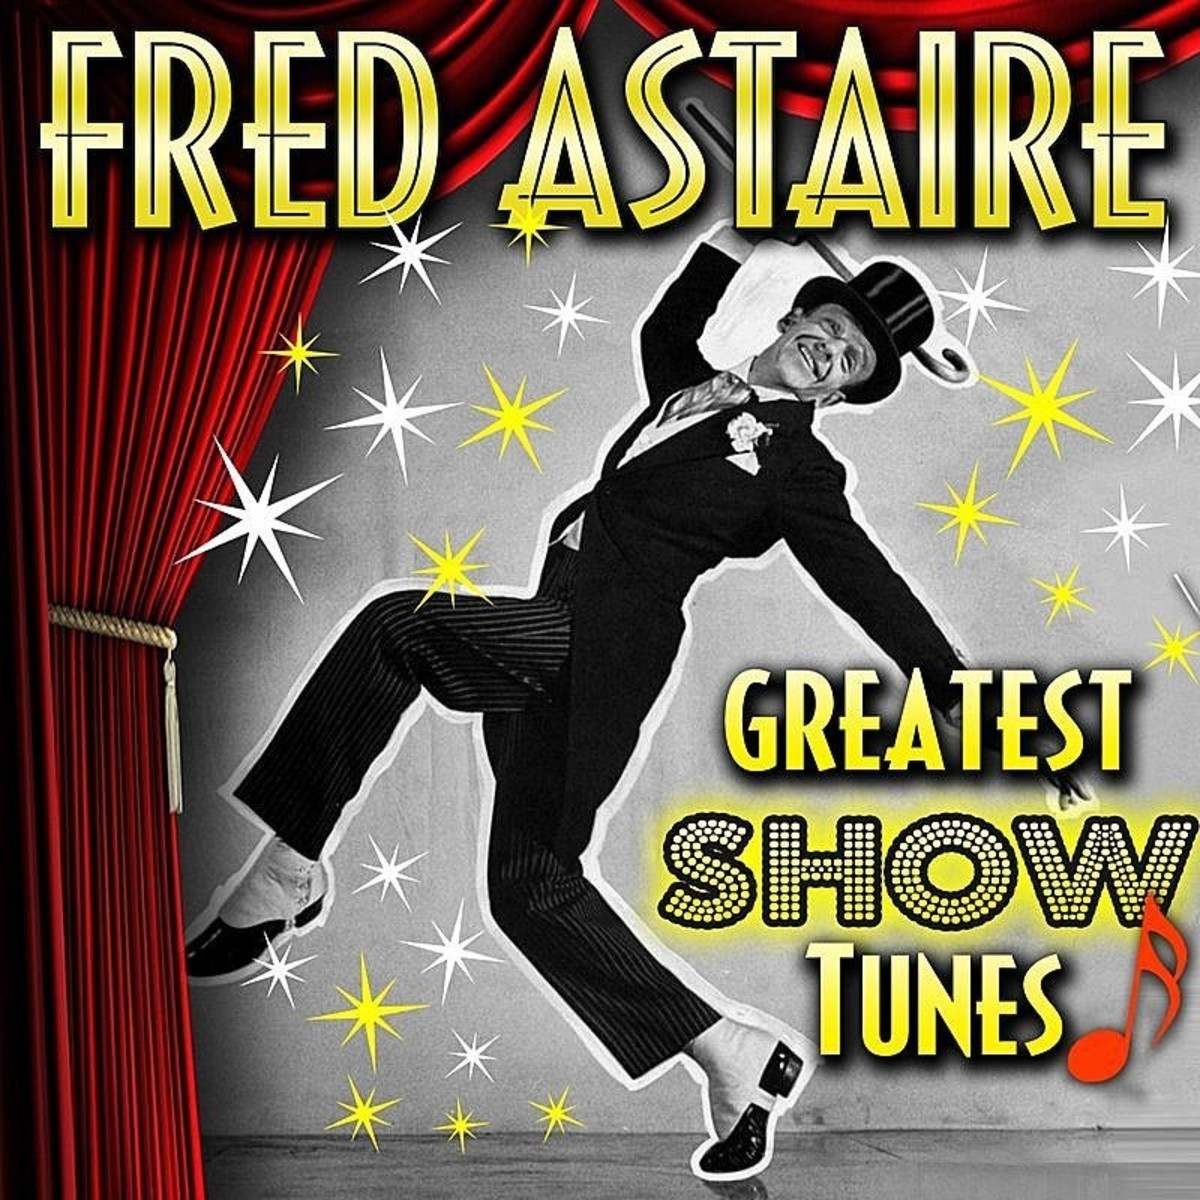 Amp fred astaire